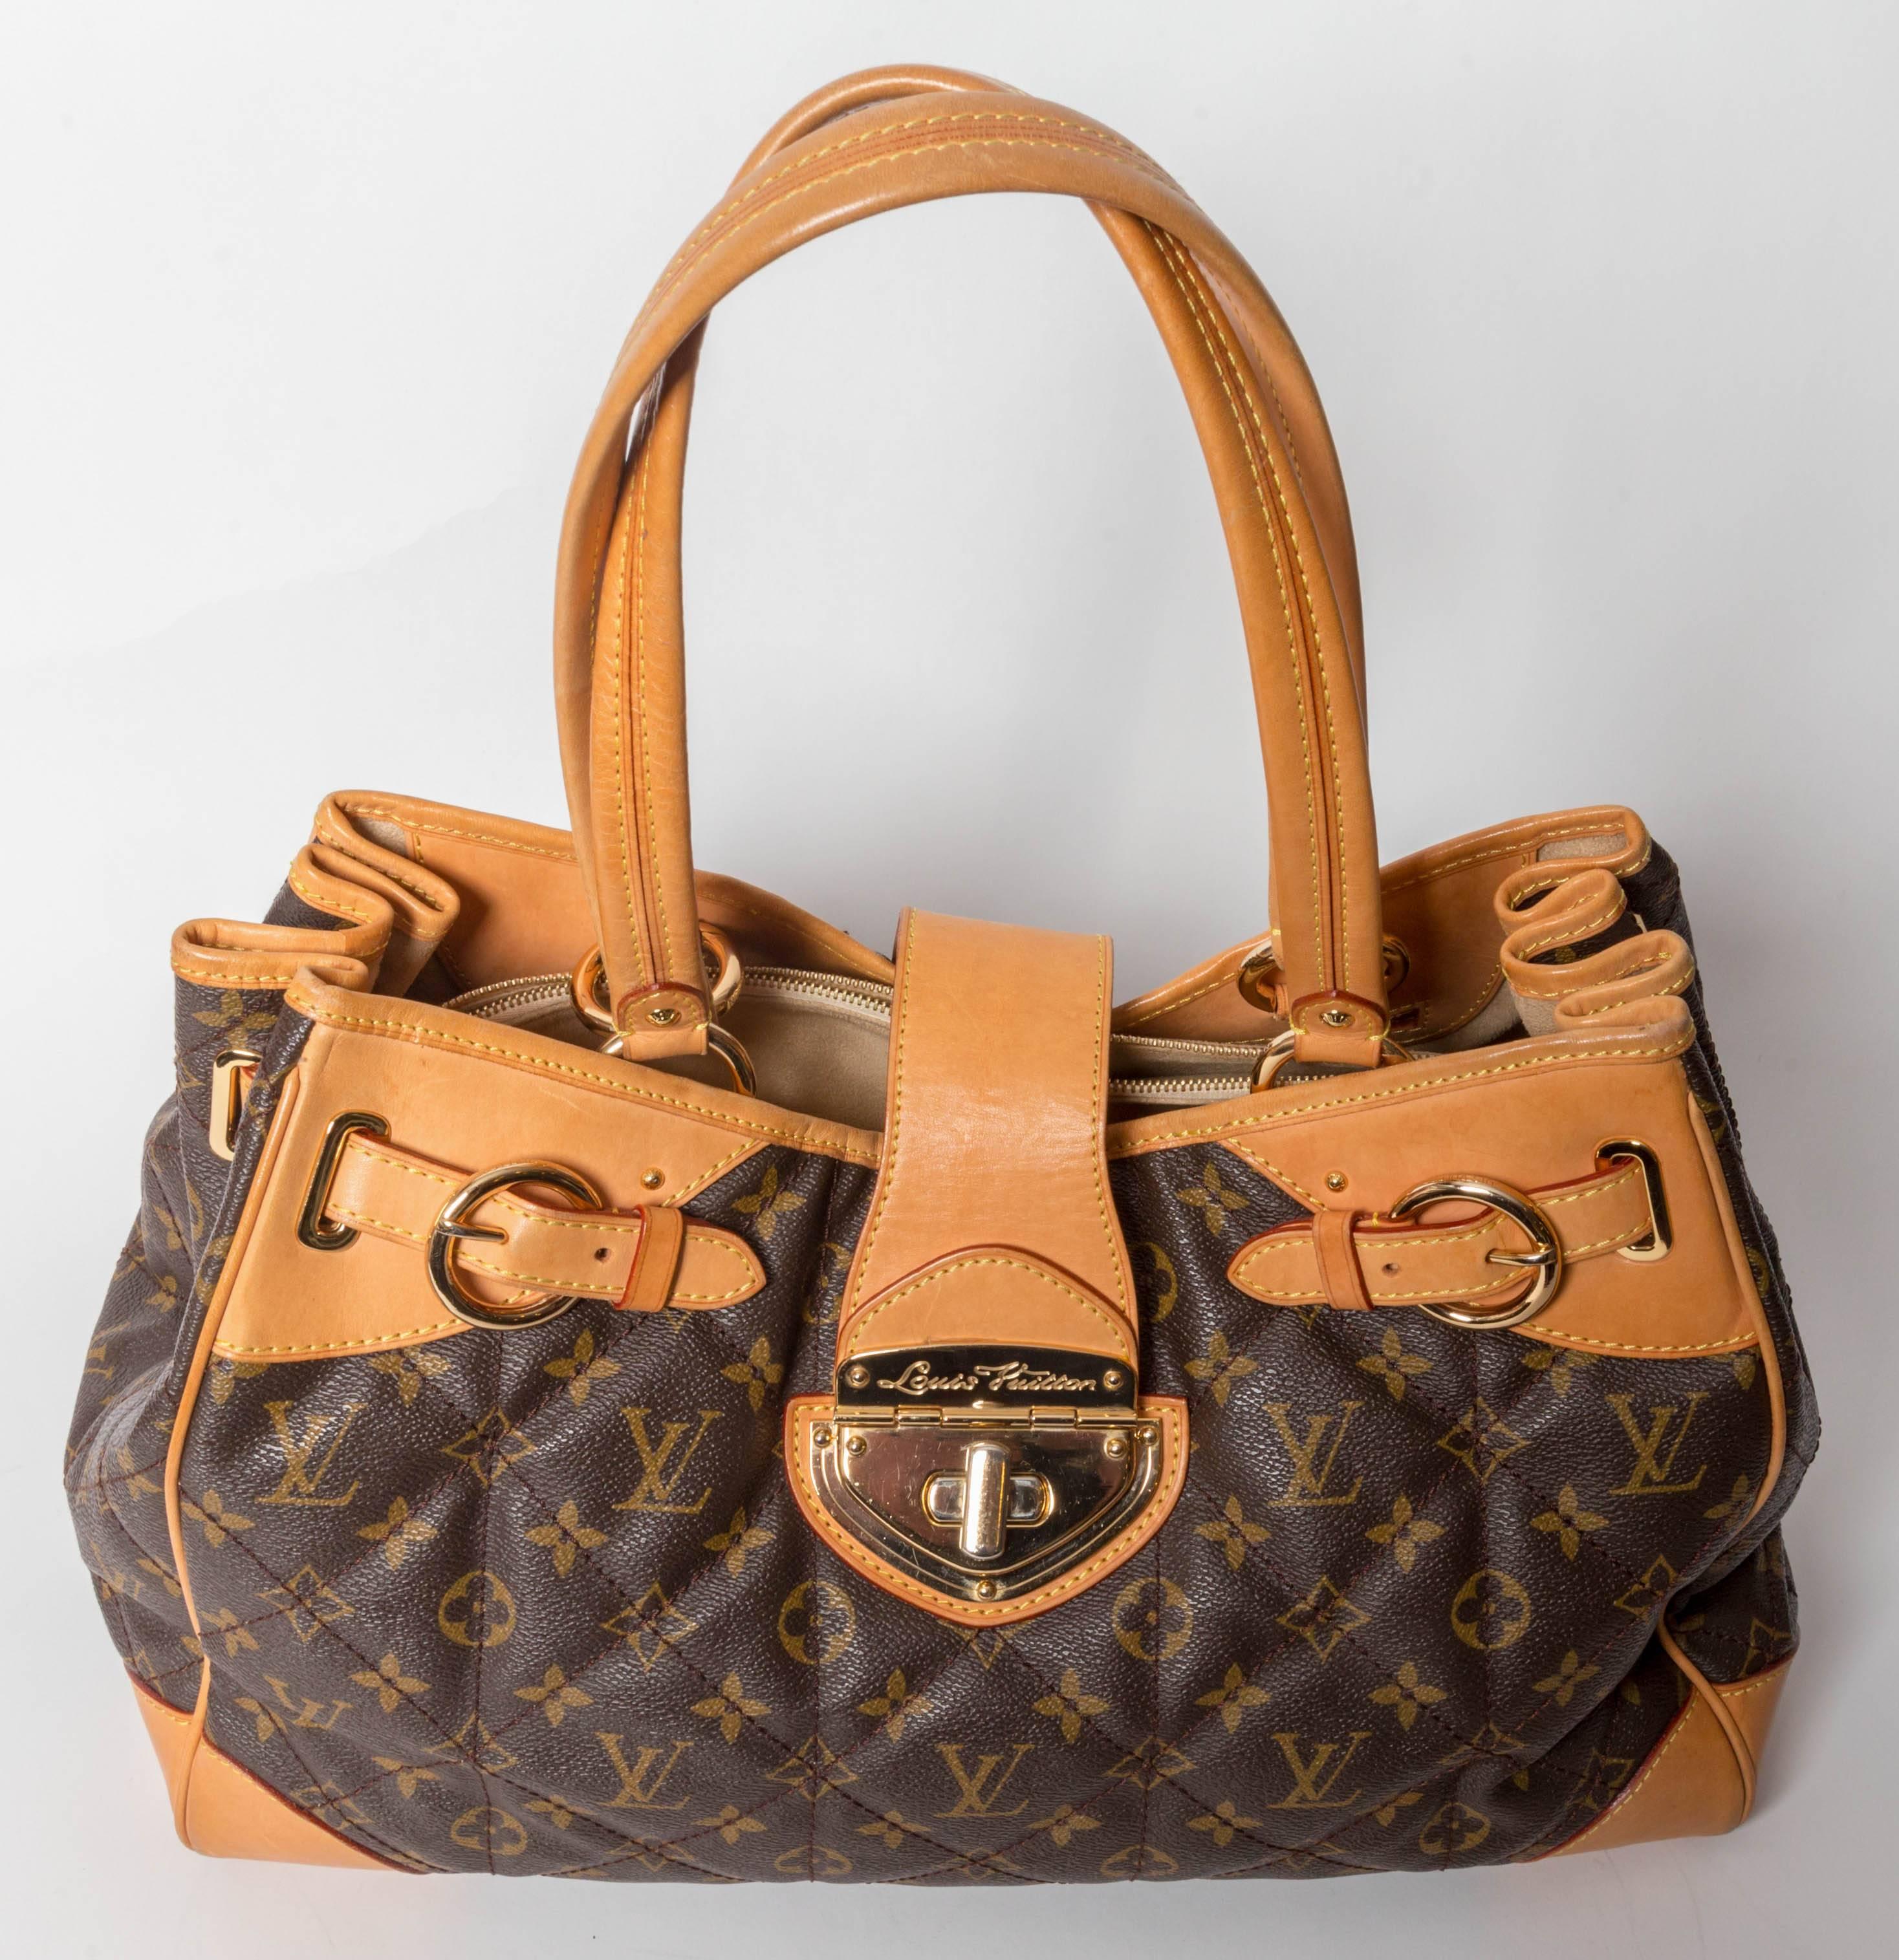 Fabulous Louis Vuitton Cirrus Handbag
In amazing condition, this handbag has 3 huge inner compartments, one with zip closure.
There is also a zip pocket in one compartment.
Dustbag is included.
Some marks to leather corners. Leather color is as